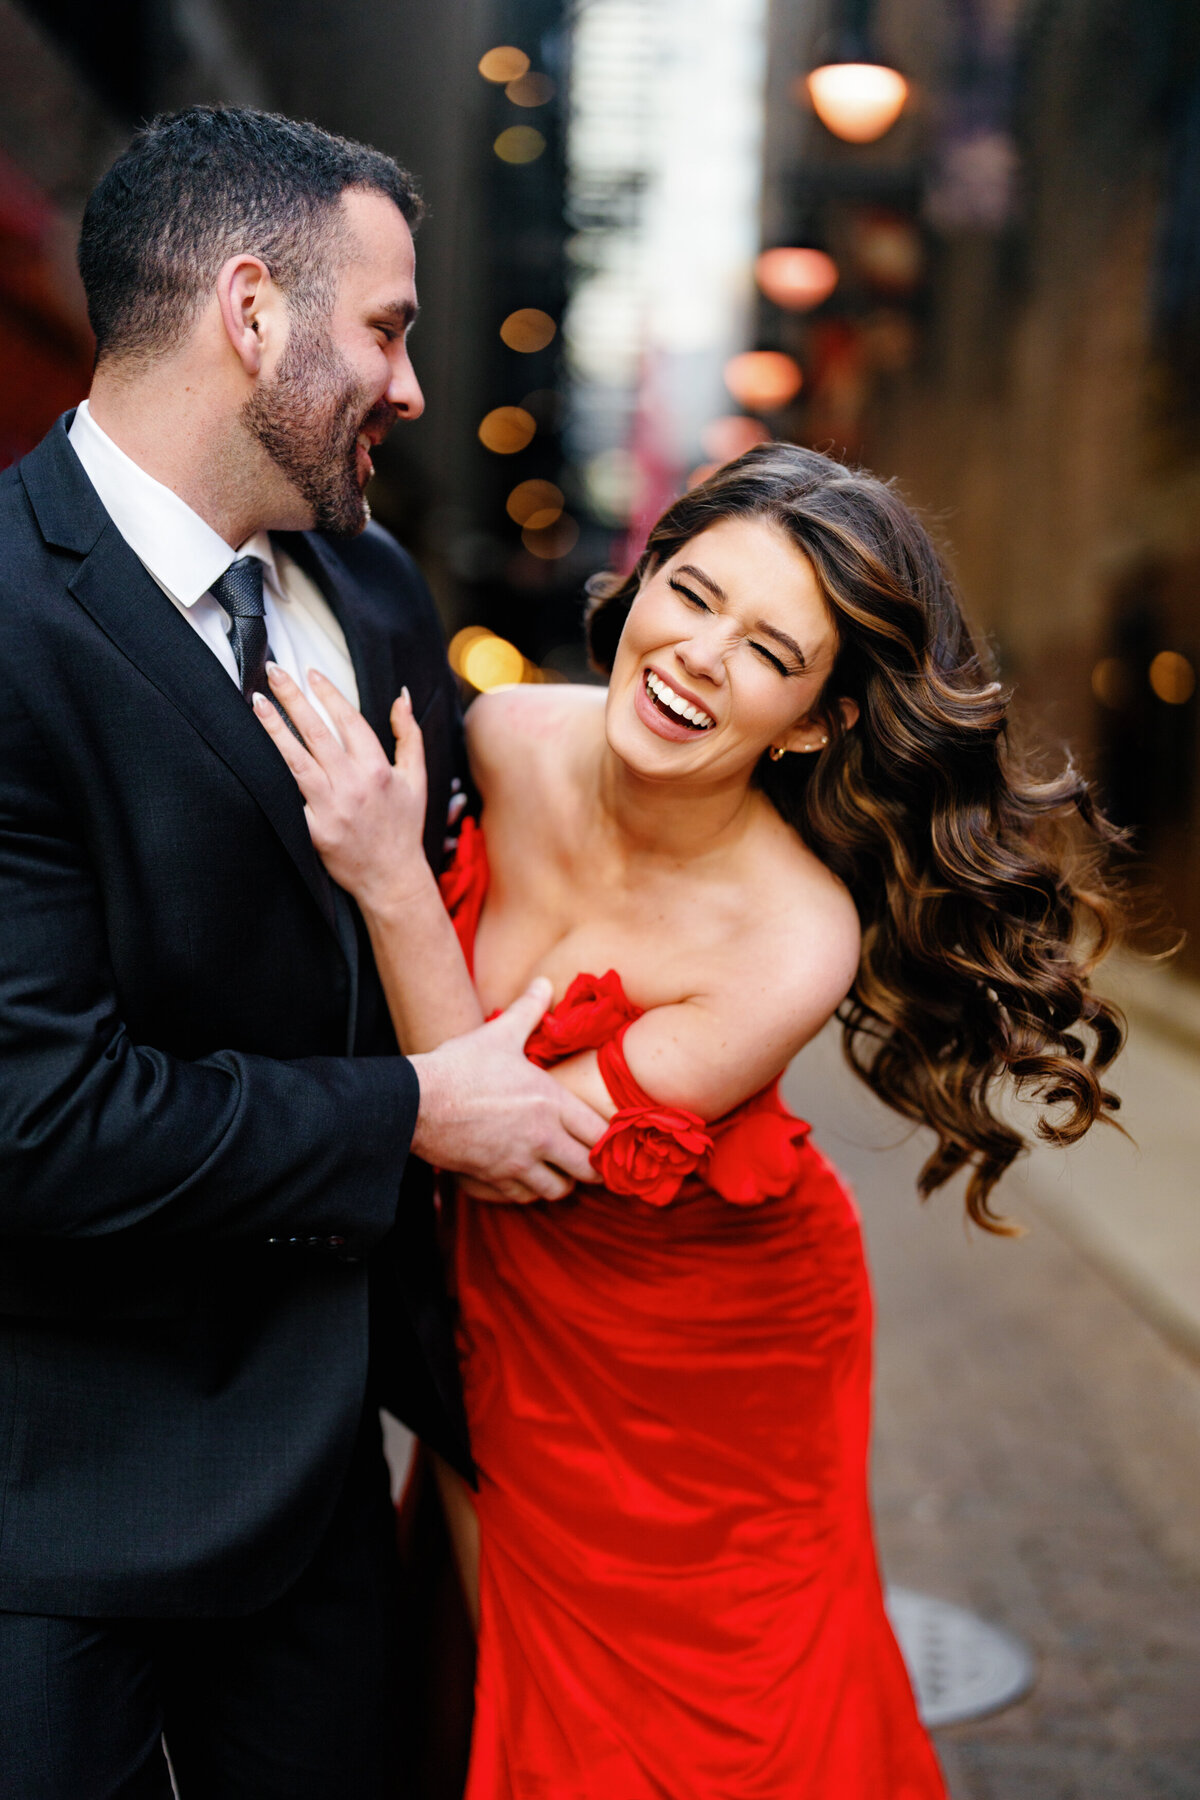 Aspen-Avenue-Chicago-Wedding-Photographer-Union-Station-Chicago-Theater-Engagement-Session-Timeless-Romantic-Red-Dress-Editorial-Stemming-From-Love-Bry-Jean-Artistry-The-Bridal-Collective-True-to-color-Luxury-FAV-101